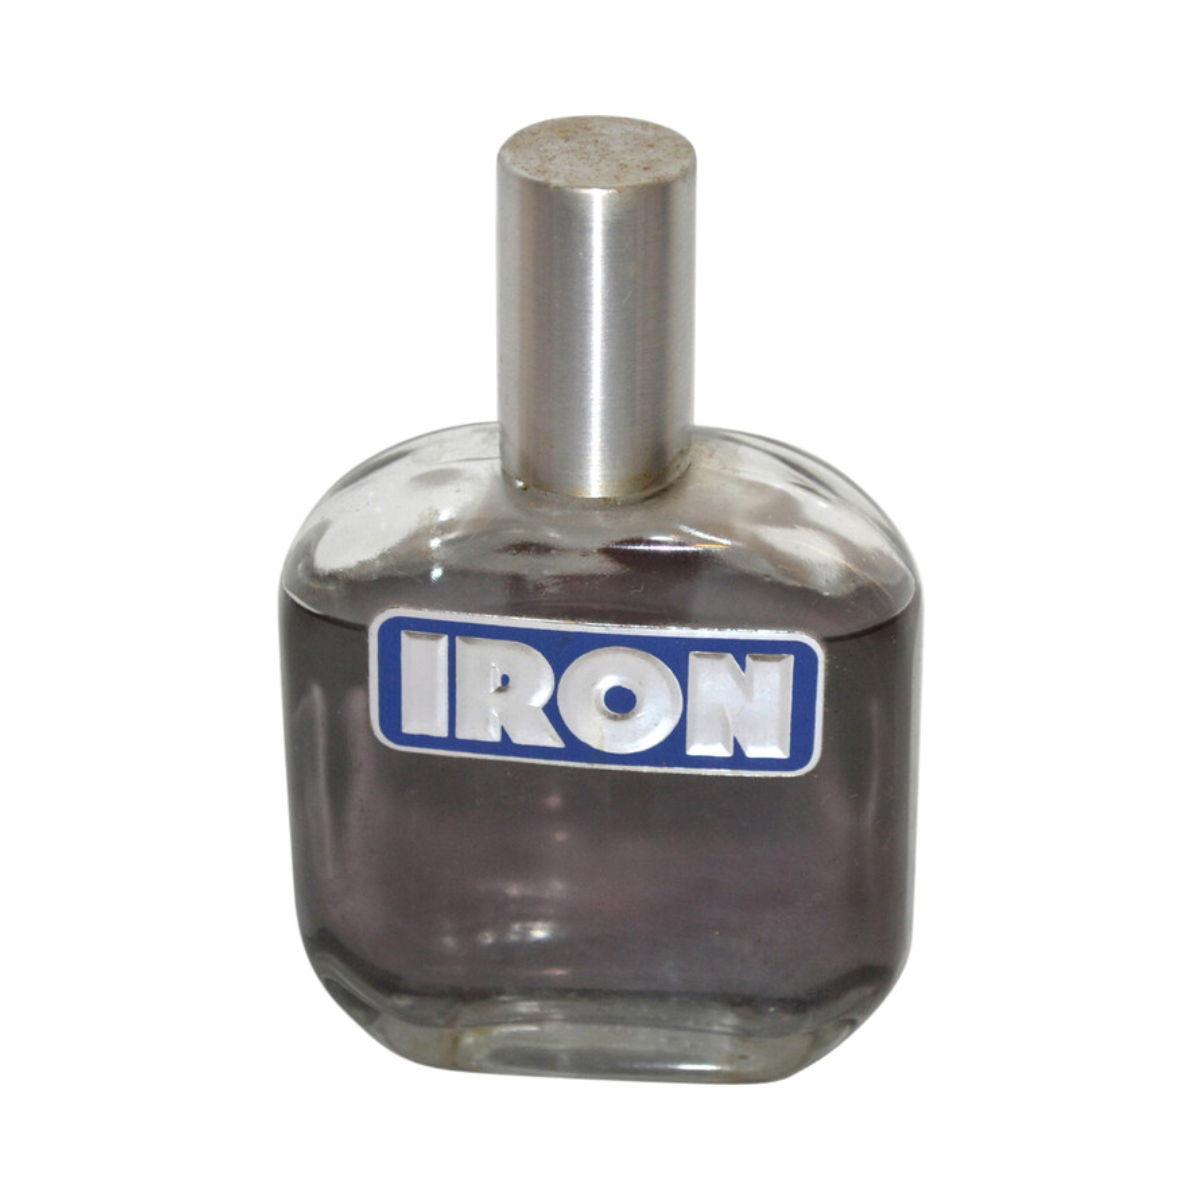 15. Iron-Inspired Perfume: A Unique and Thoughtful 6 Year Anniversary Gift Idea for Her